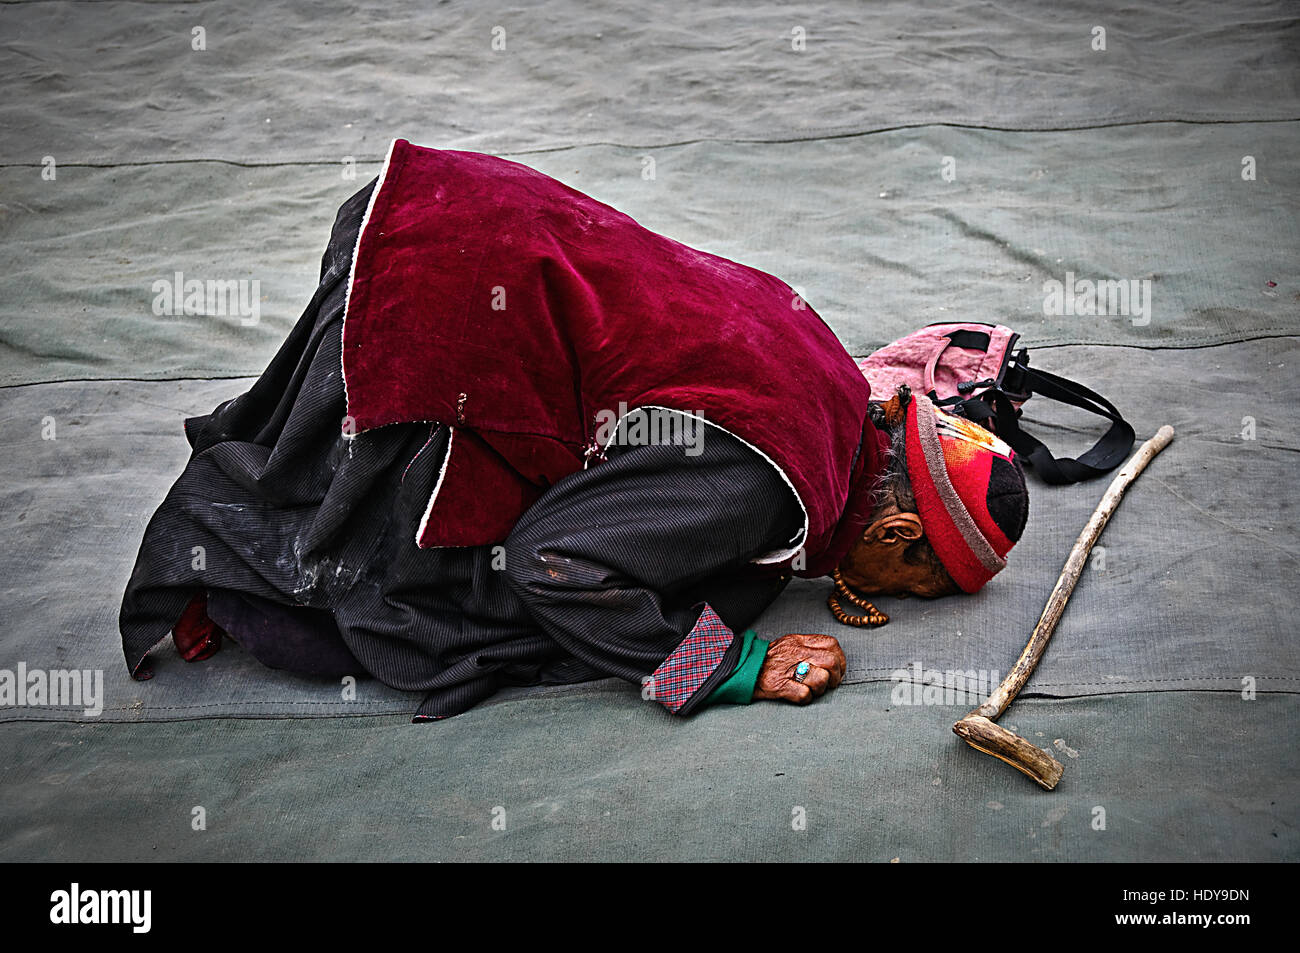 A ladakhi Buddhist religious woman praying on her knees in traditional dress and walking stick Stock Photo